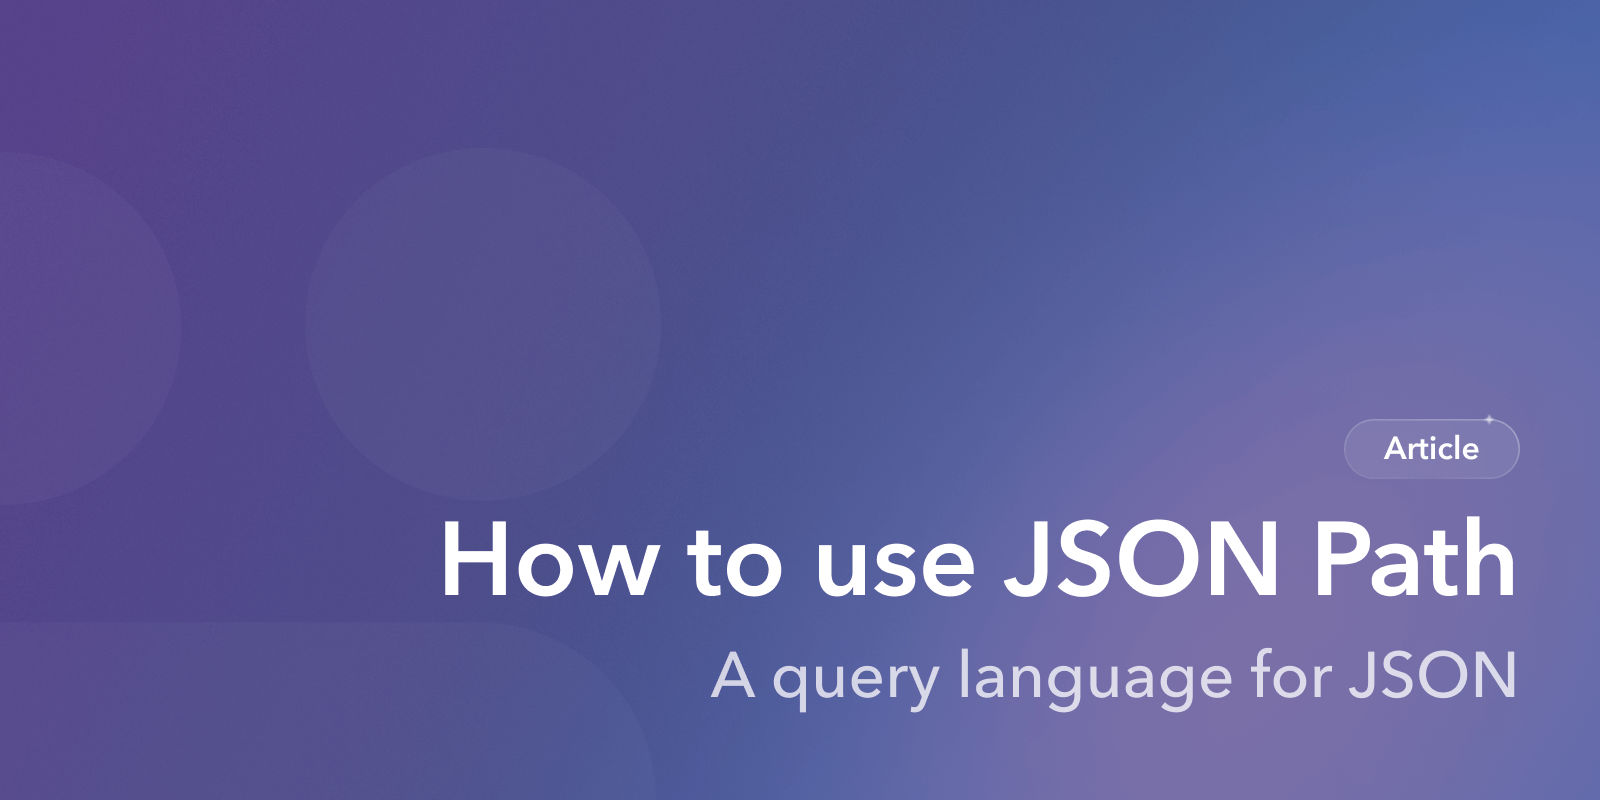 How to use JSON Path (10 minute read)